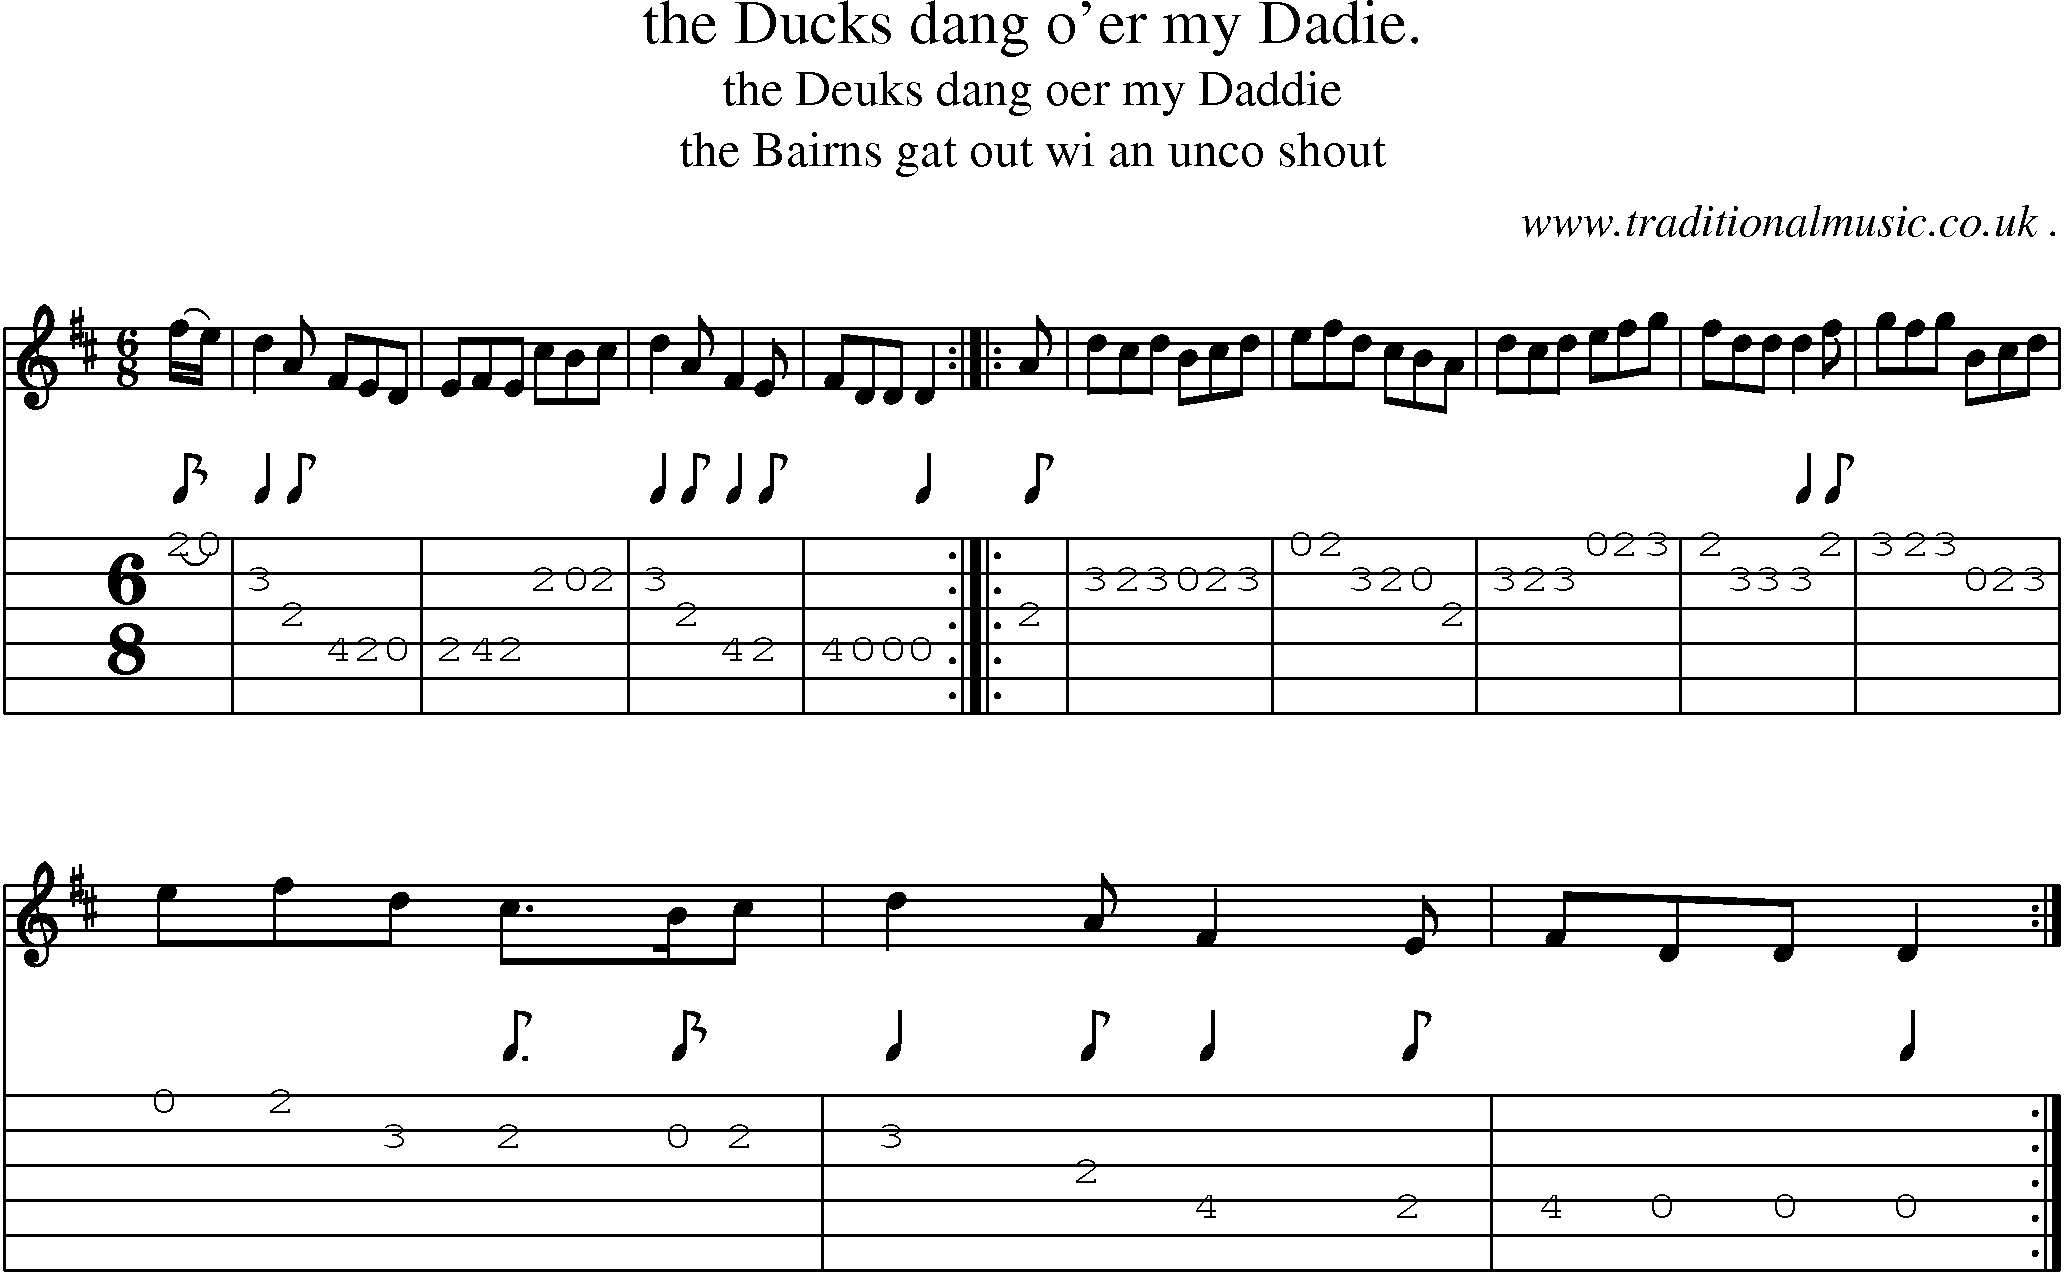 Sheet-Music and Guitar Tabs for The Ducks Dang Oer My Dadie